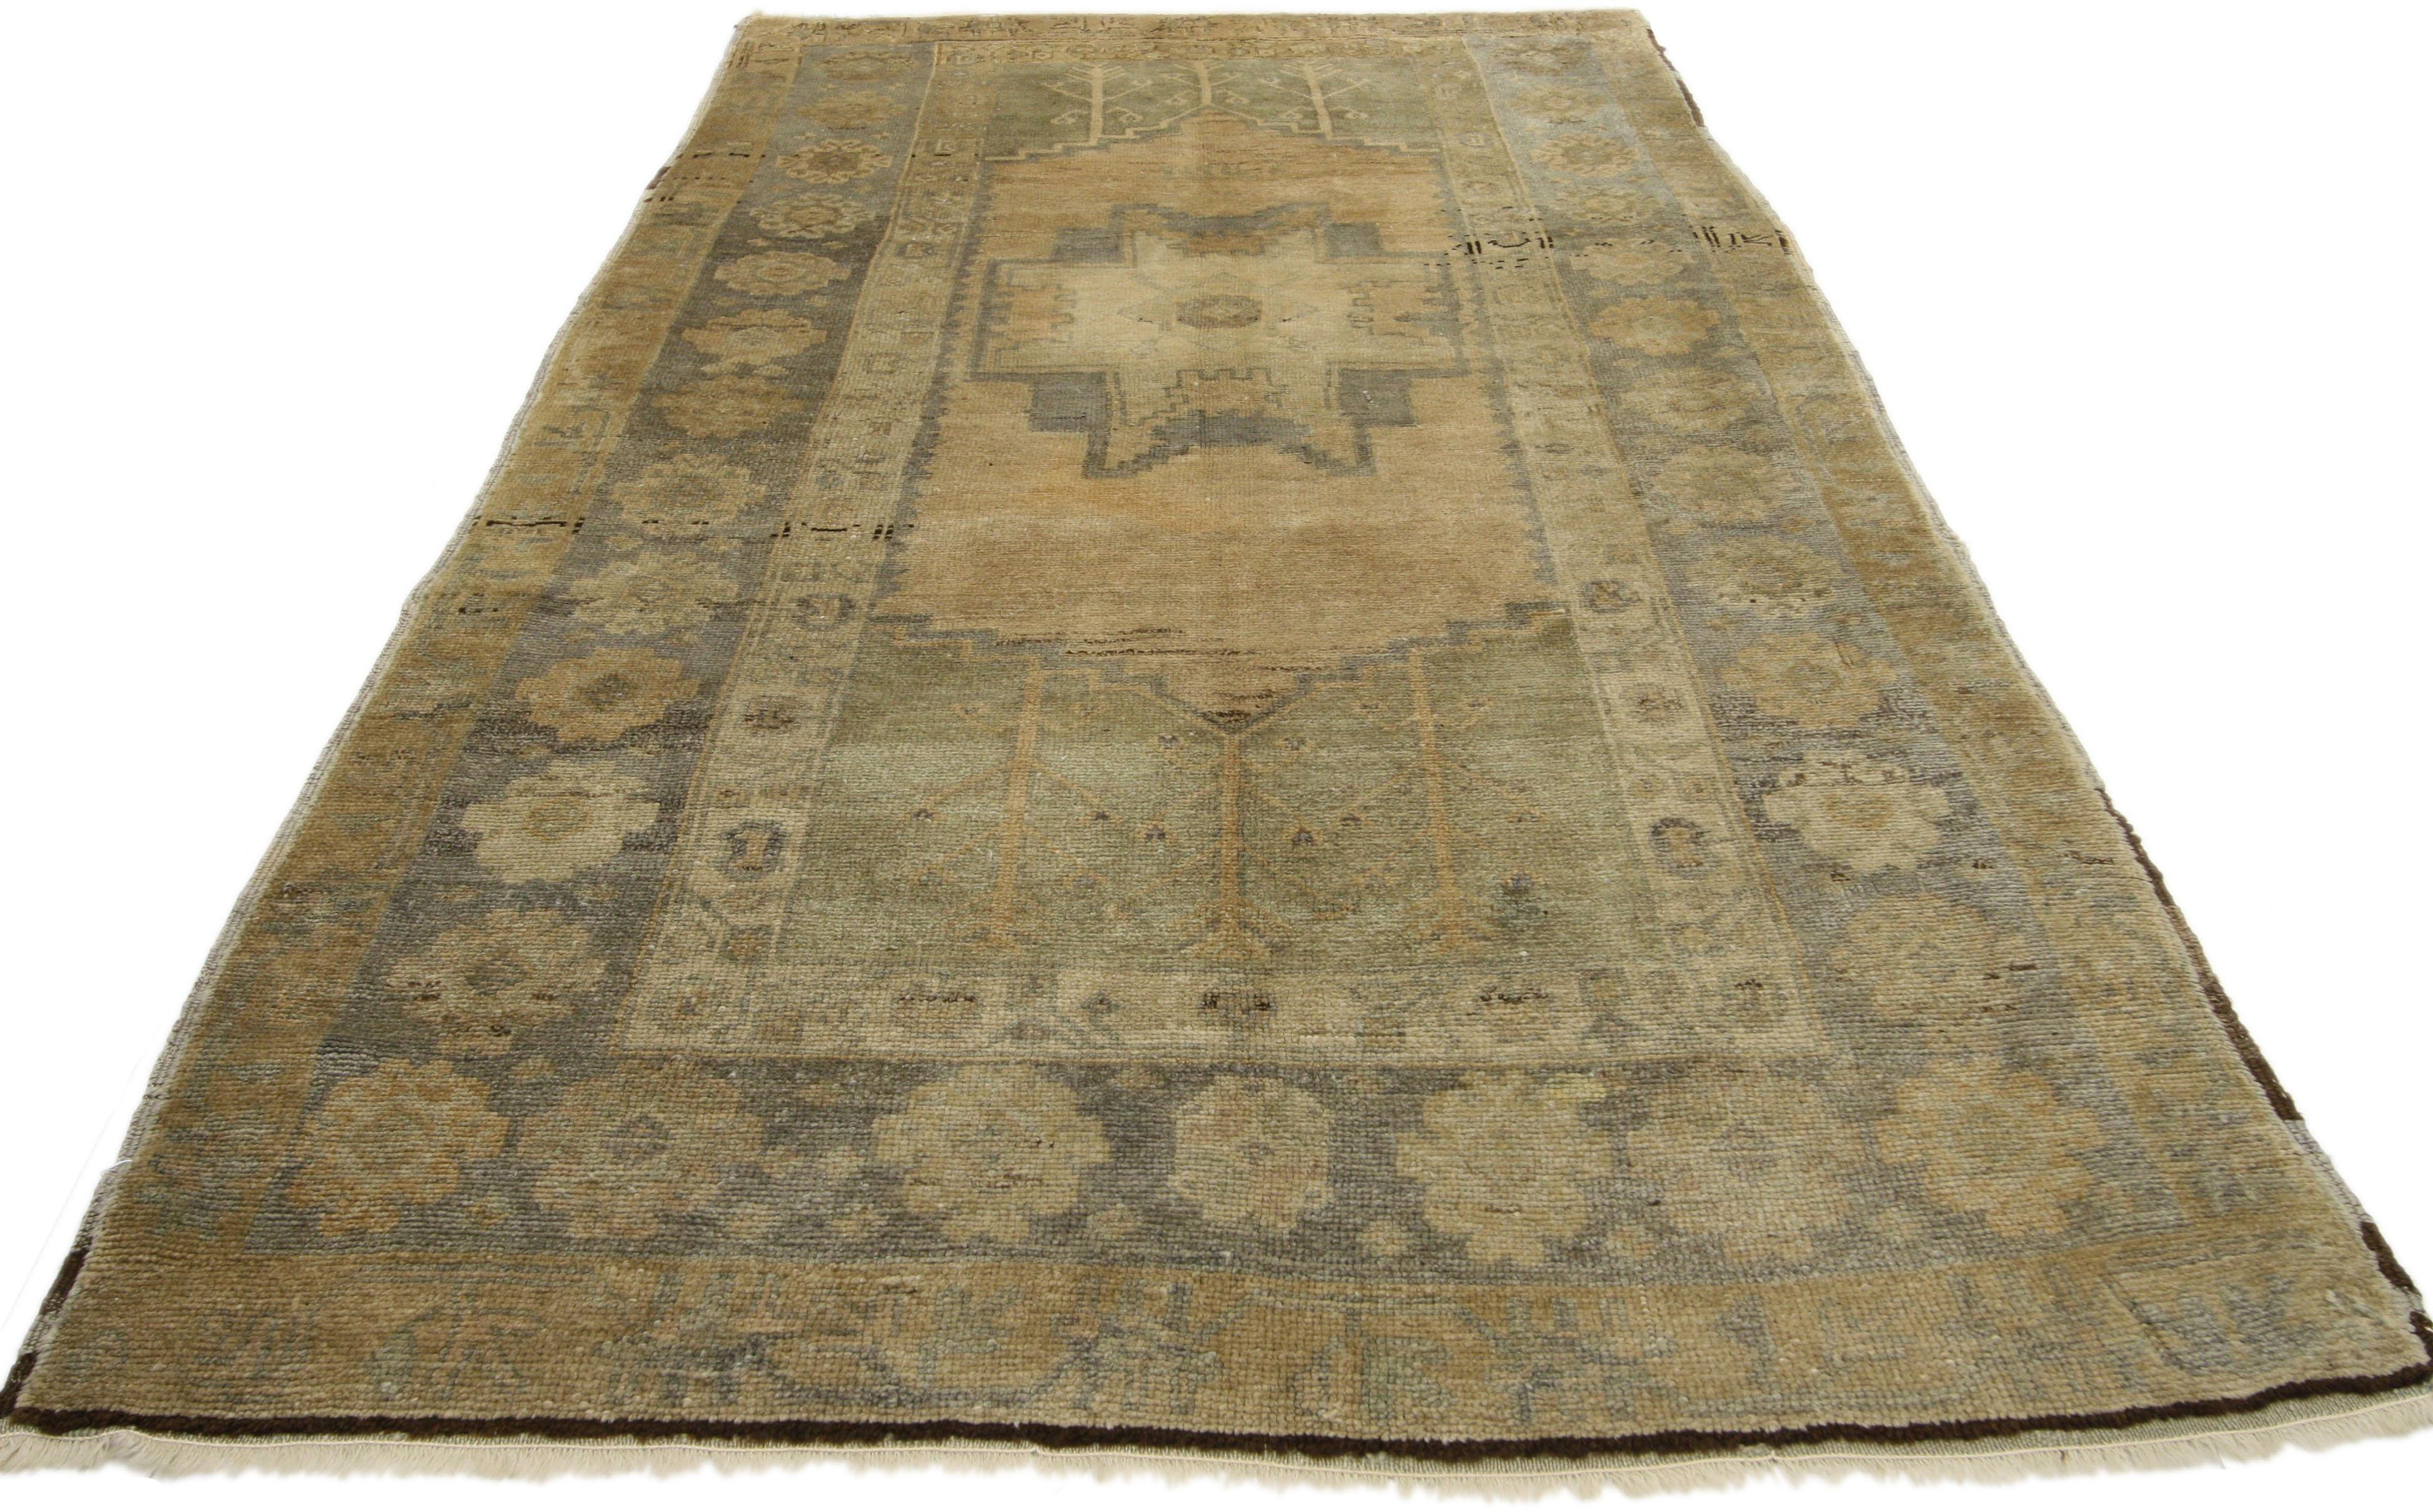 73638, vintage Turkish Oushak rug with rustic American Colonial style, short hallway runner. This hand knotted wool vintage Turkish Oushak rug features a stepped geometric central medallion- a variation of the Lesghi star motif symbolizing